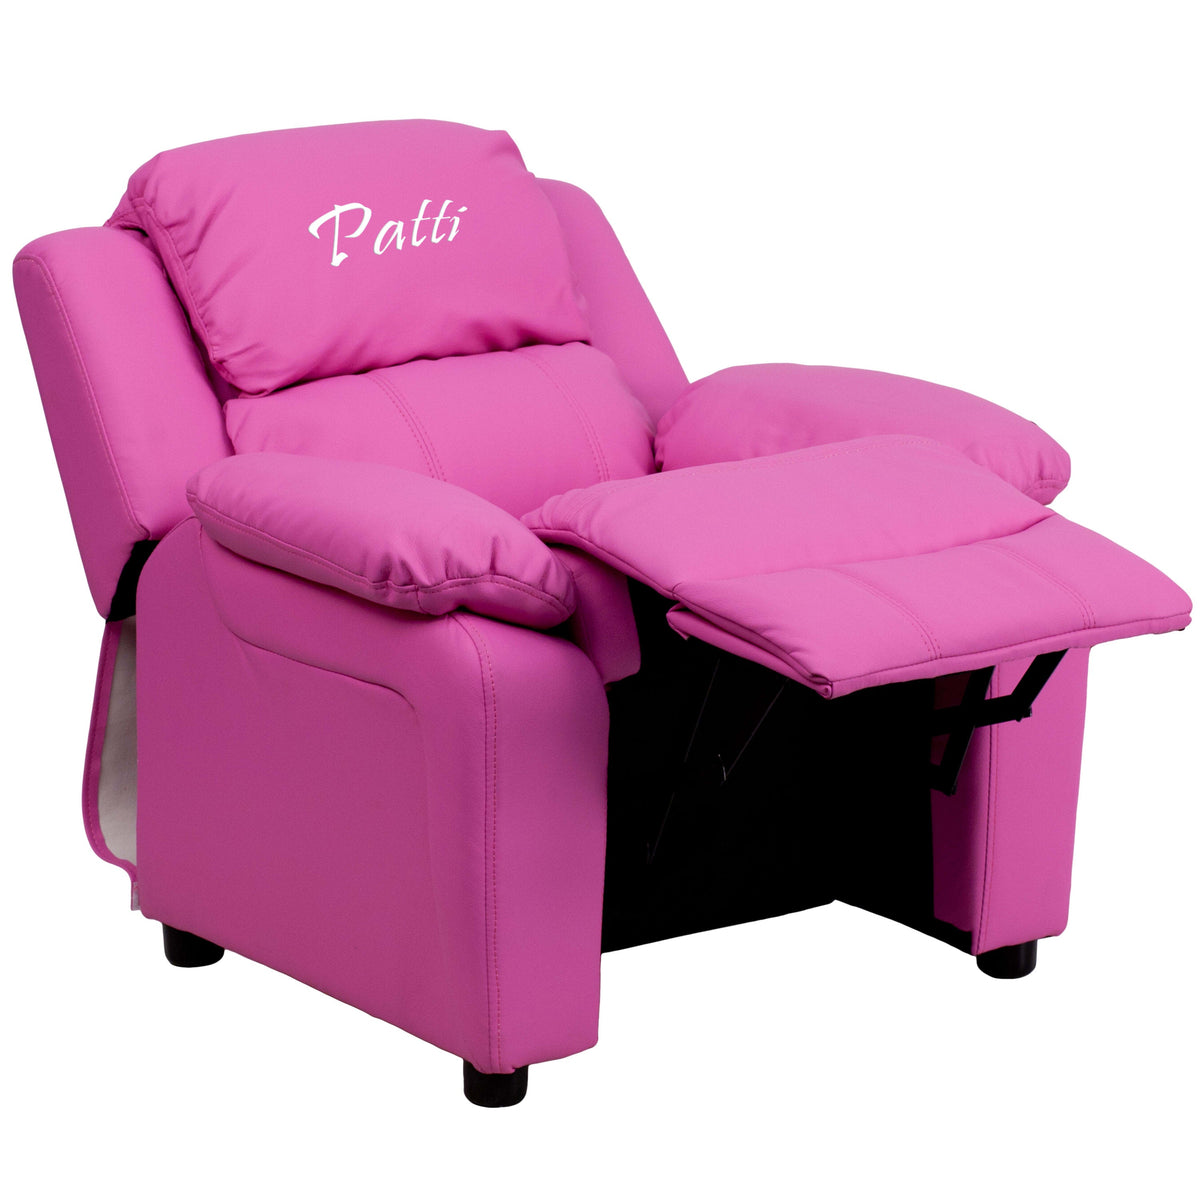 Hot Pink Vinyl |#| Personalized Deluxe Padded Hot Pink Vinyl Kids Recliner with Storage Arms